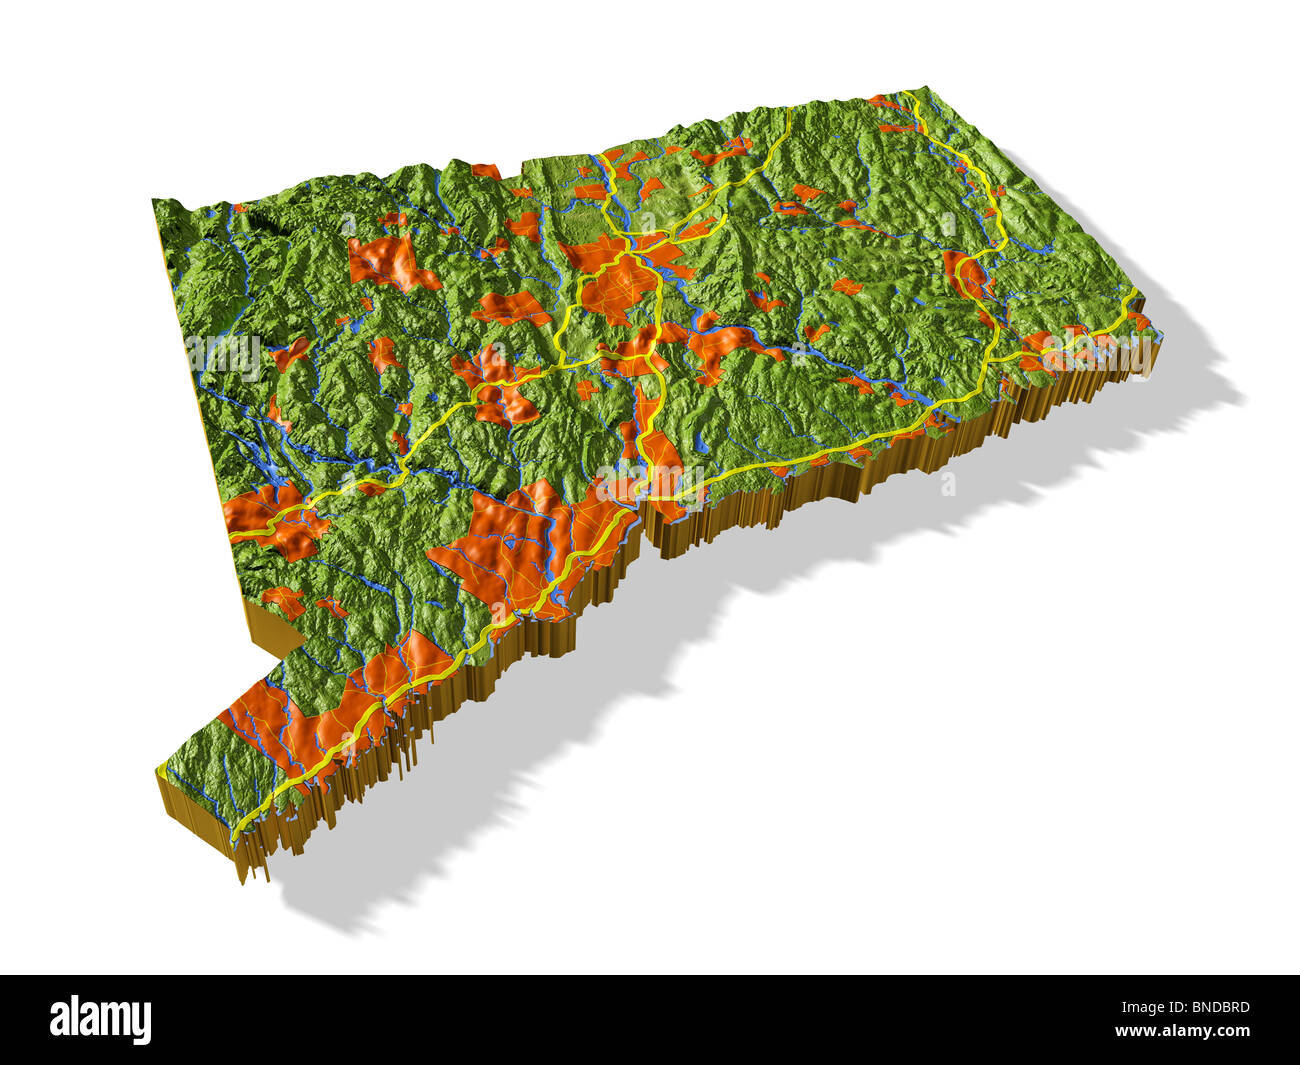 Connecticut, 3D relief map cut-out with urban areas, interstate highways and borders. Stock Photo